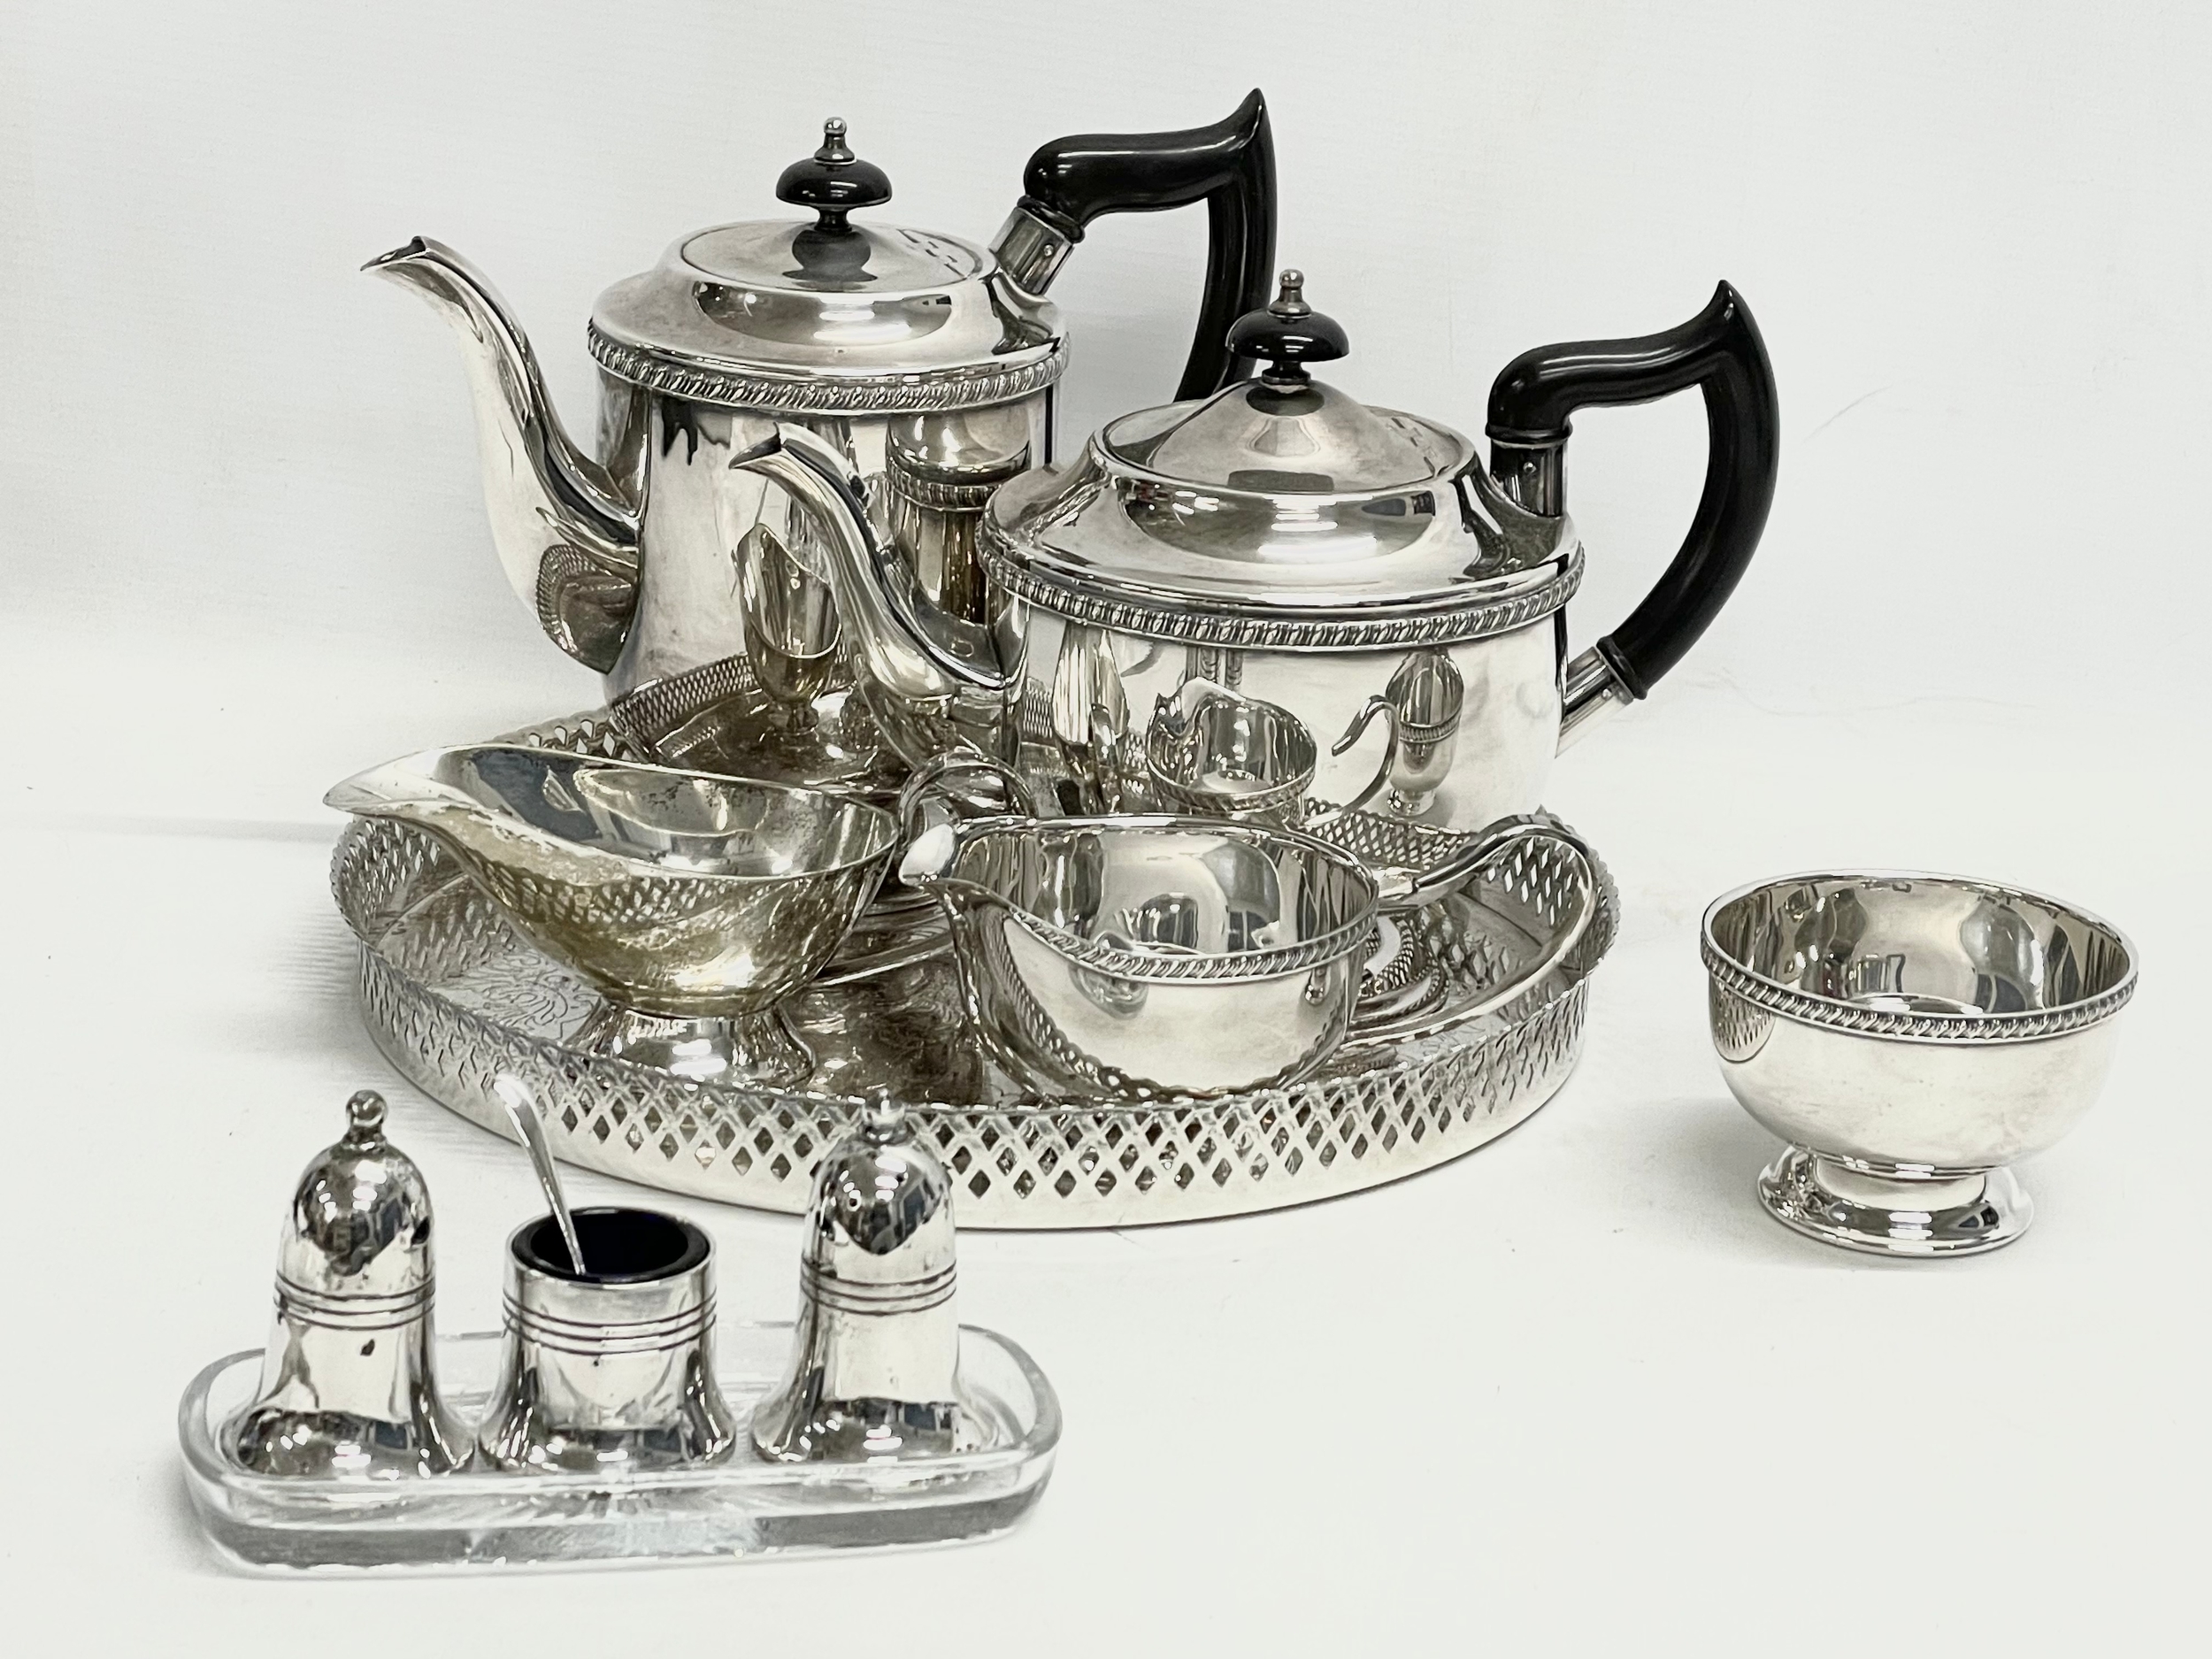 A vintage Georgian style silver plated tea service and more.